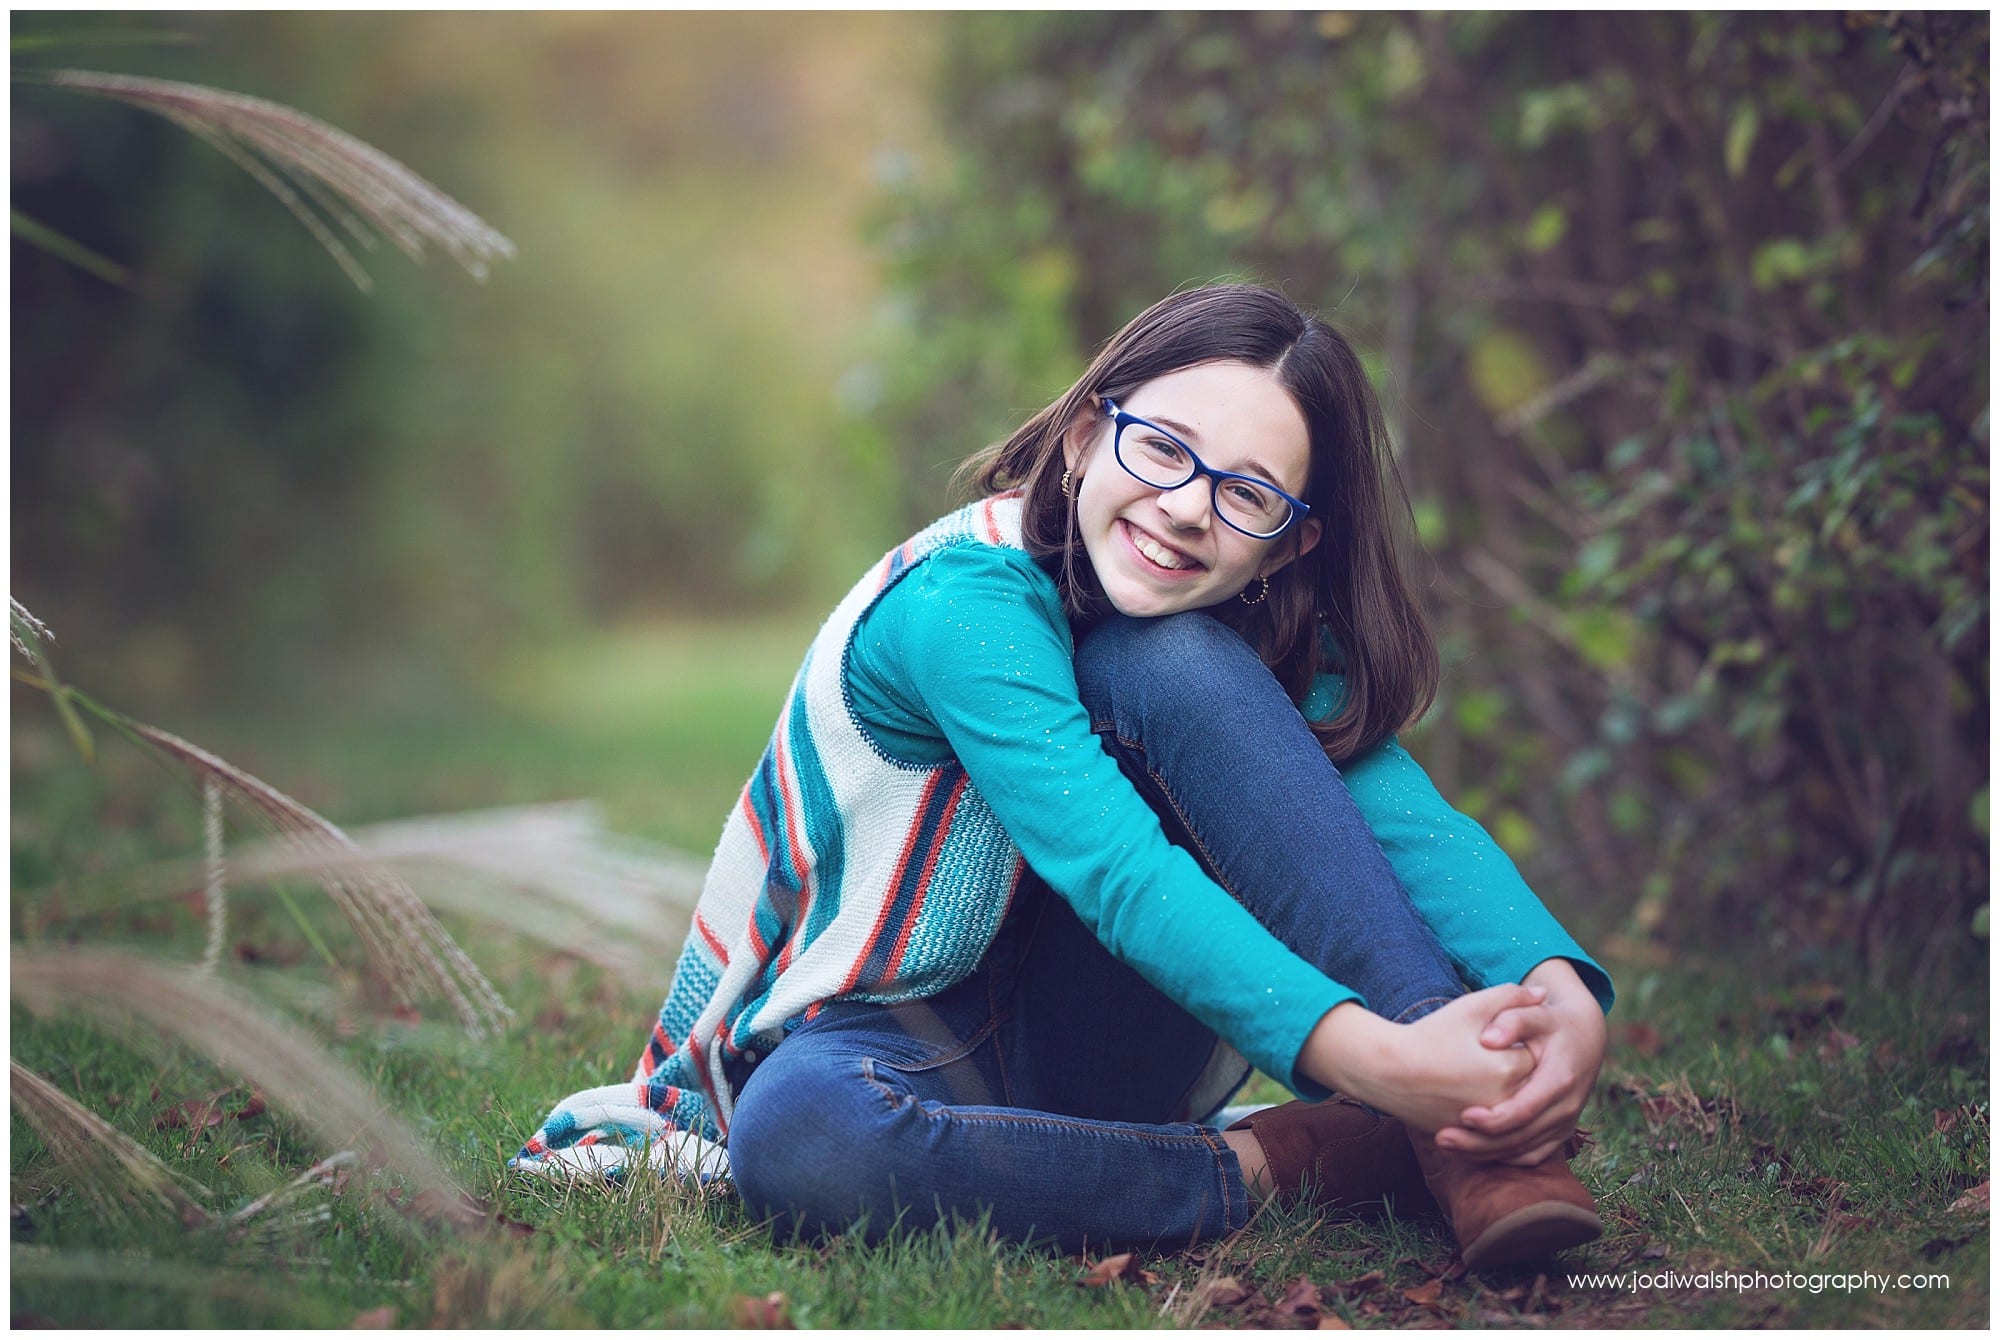 tween girl with glasses in blue